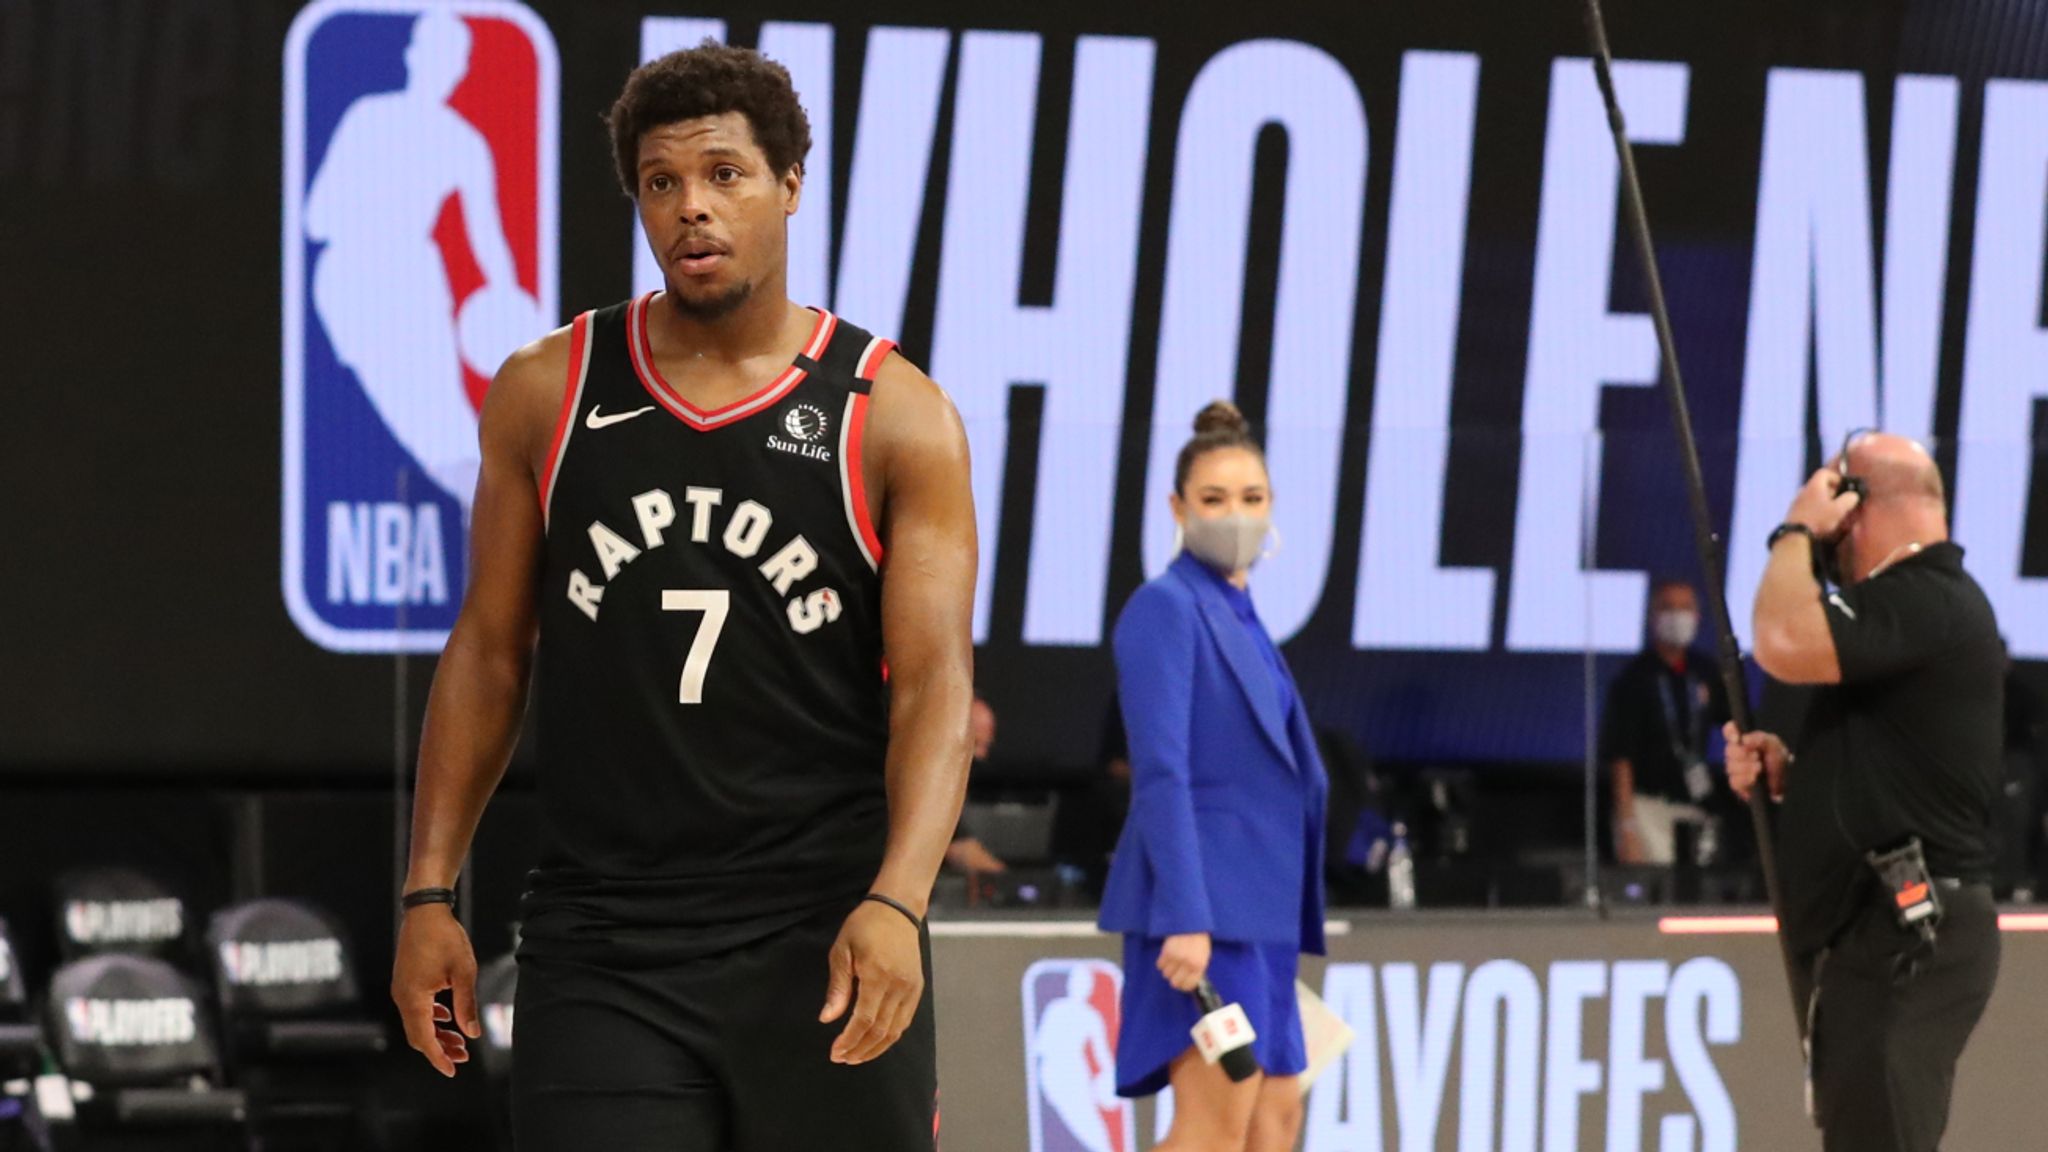  Kyle Lowry of the Toronto Raptors walk off the court after the game against the Boston Celtics during Game Six of the Eastern Conference Semifinals 